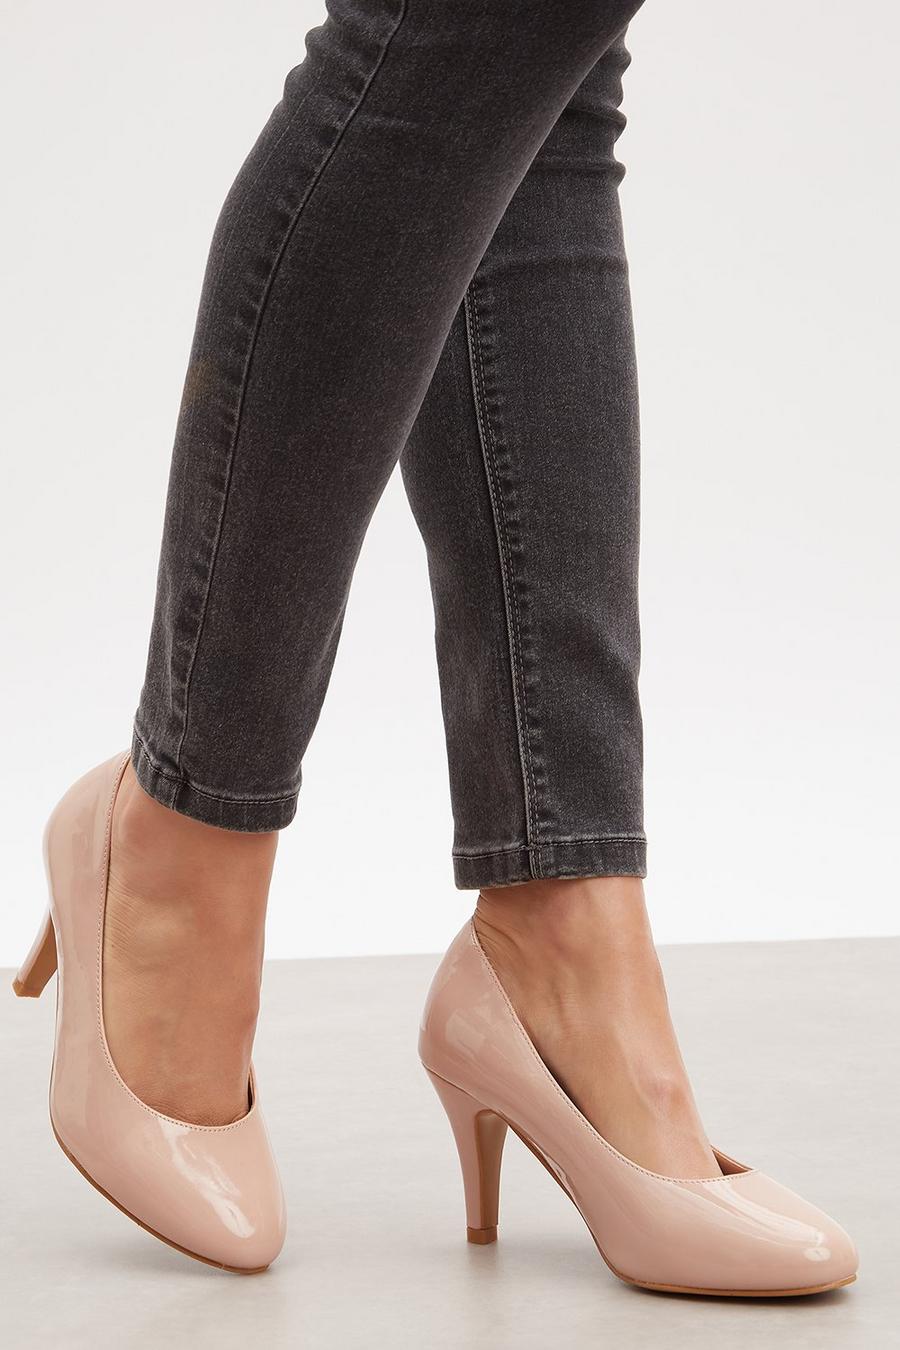 Good For The Sole: Extra Wide Comfort Eloise Court